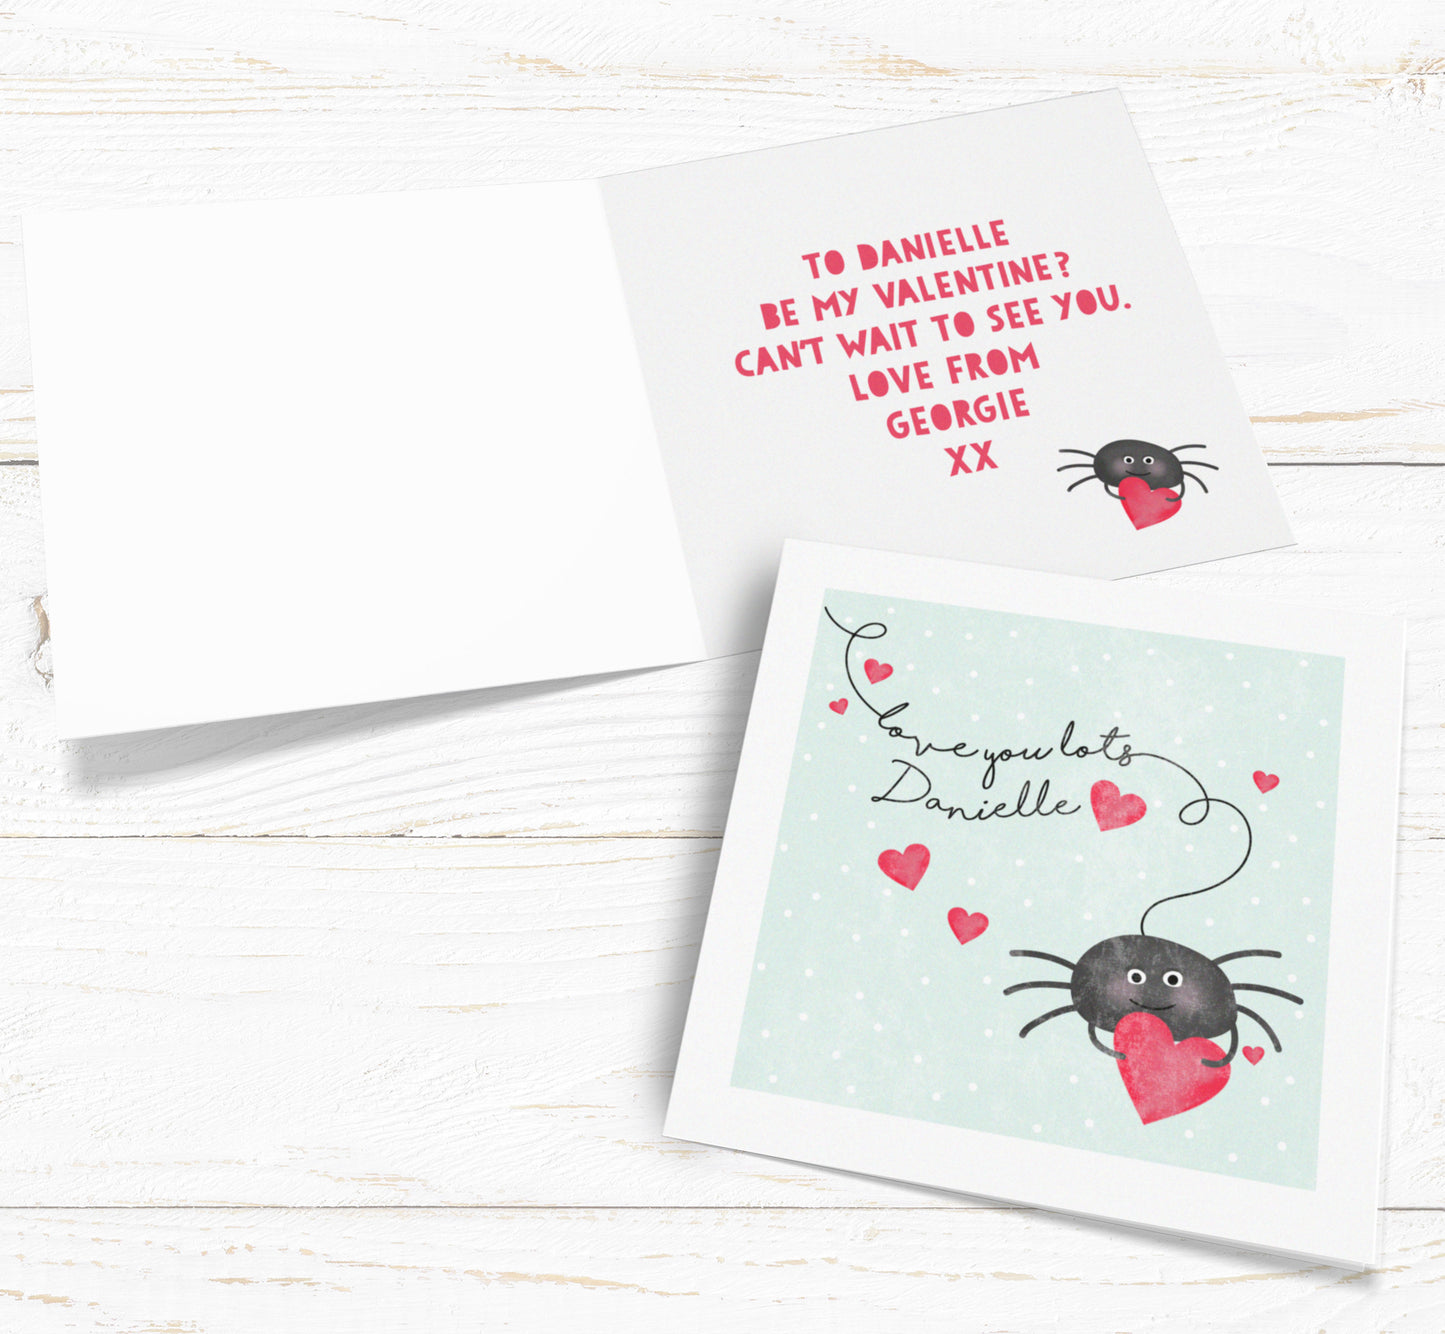 Love You Lots Spider Personalised Card. Cute Valentine's Card. Cute spider card. I Love You Card. Send Direct Option.